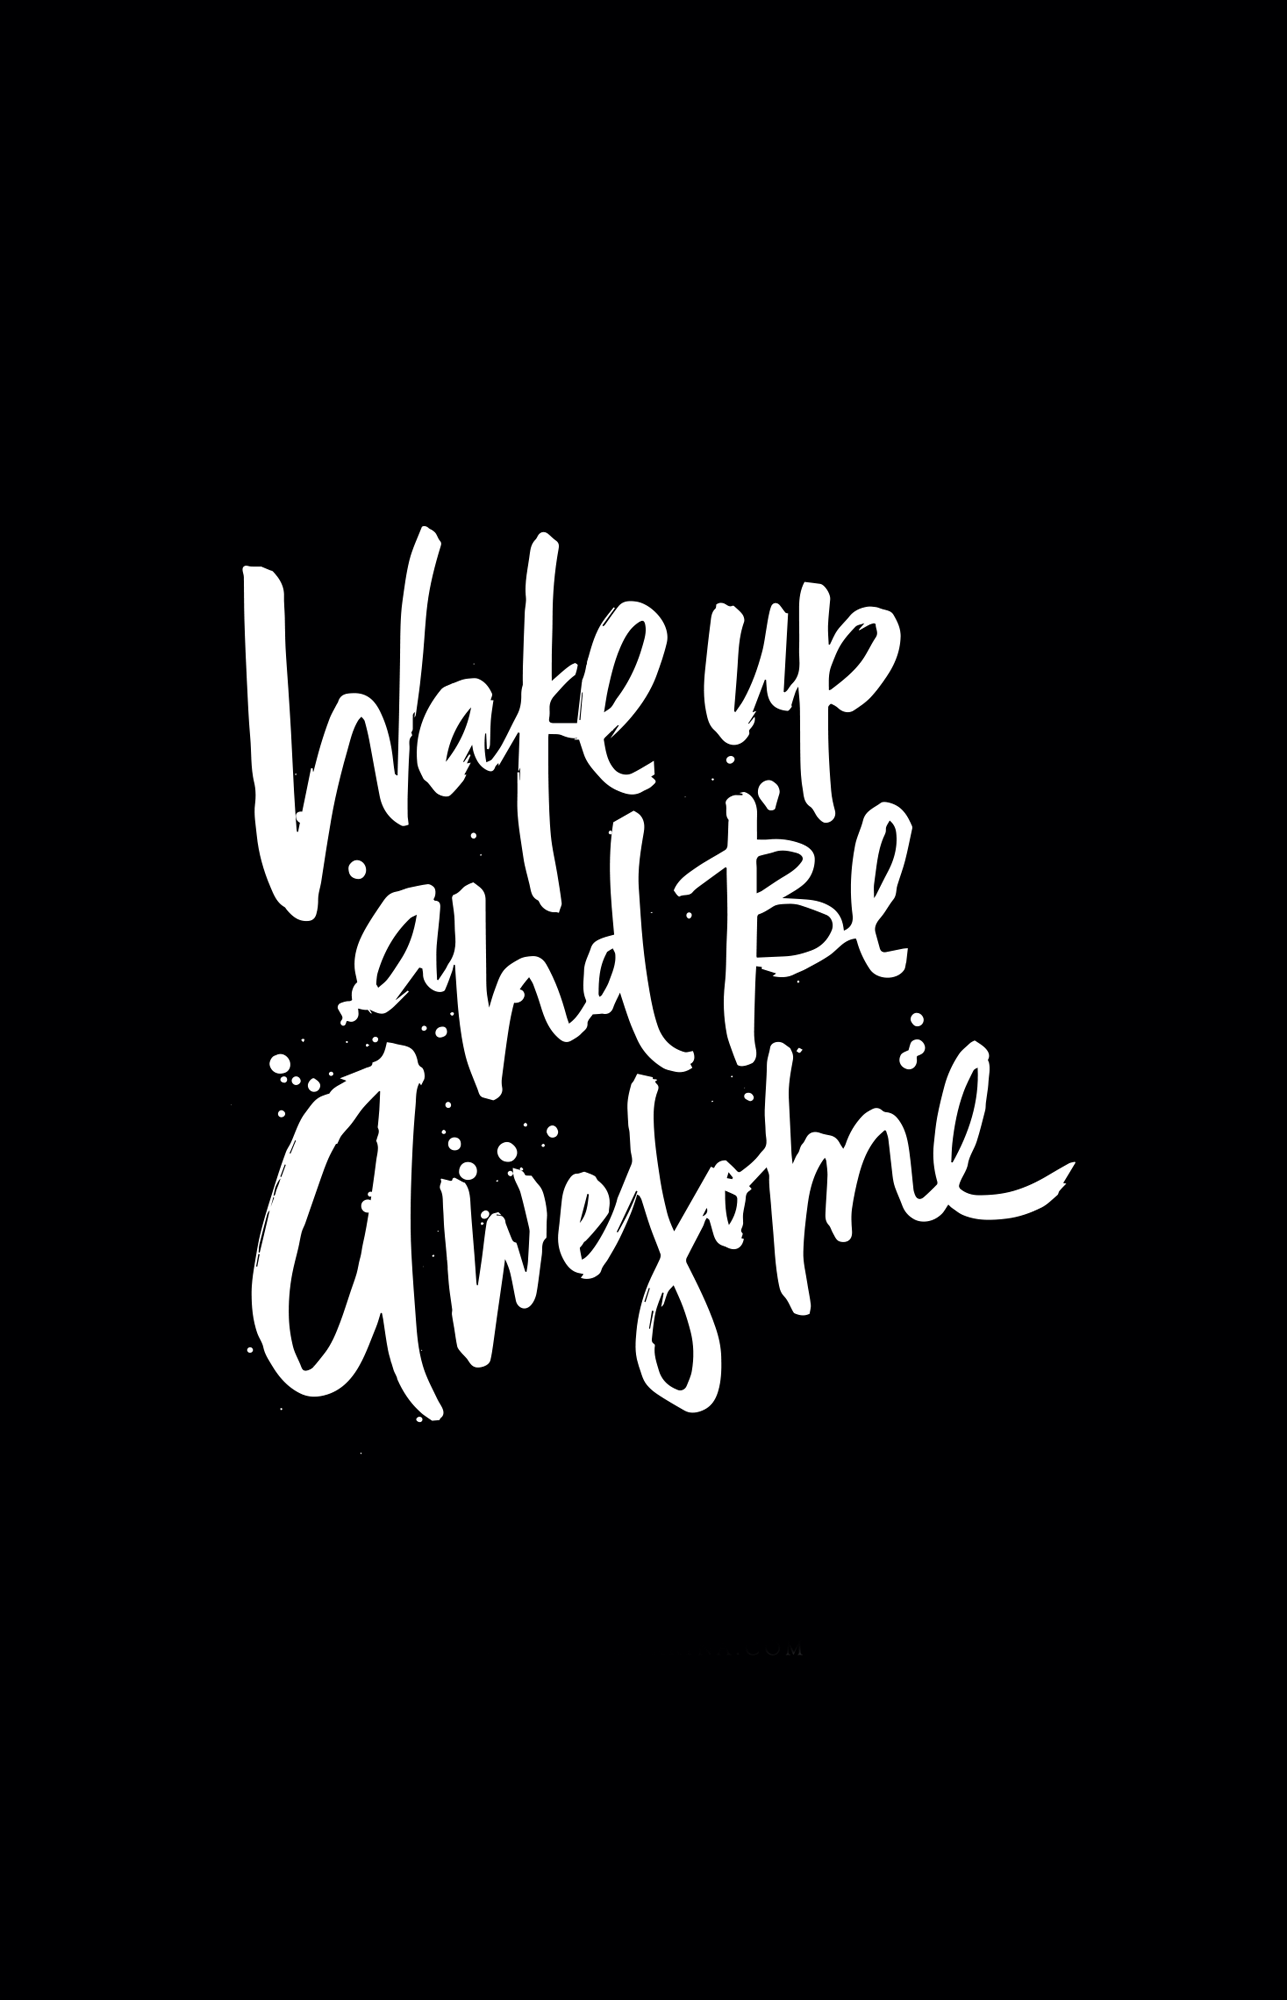 Black White Wake Up Be Awesome Iphone Wallpaper Phone - Calligraphy - HD Wallpaper 